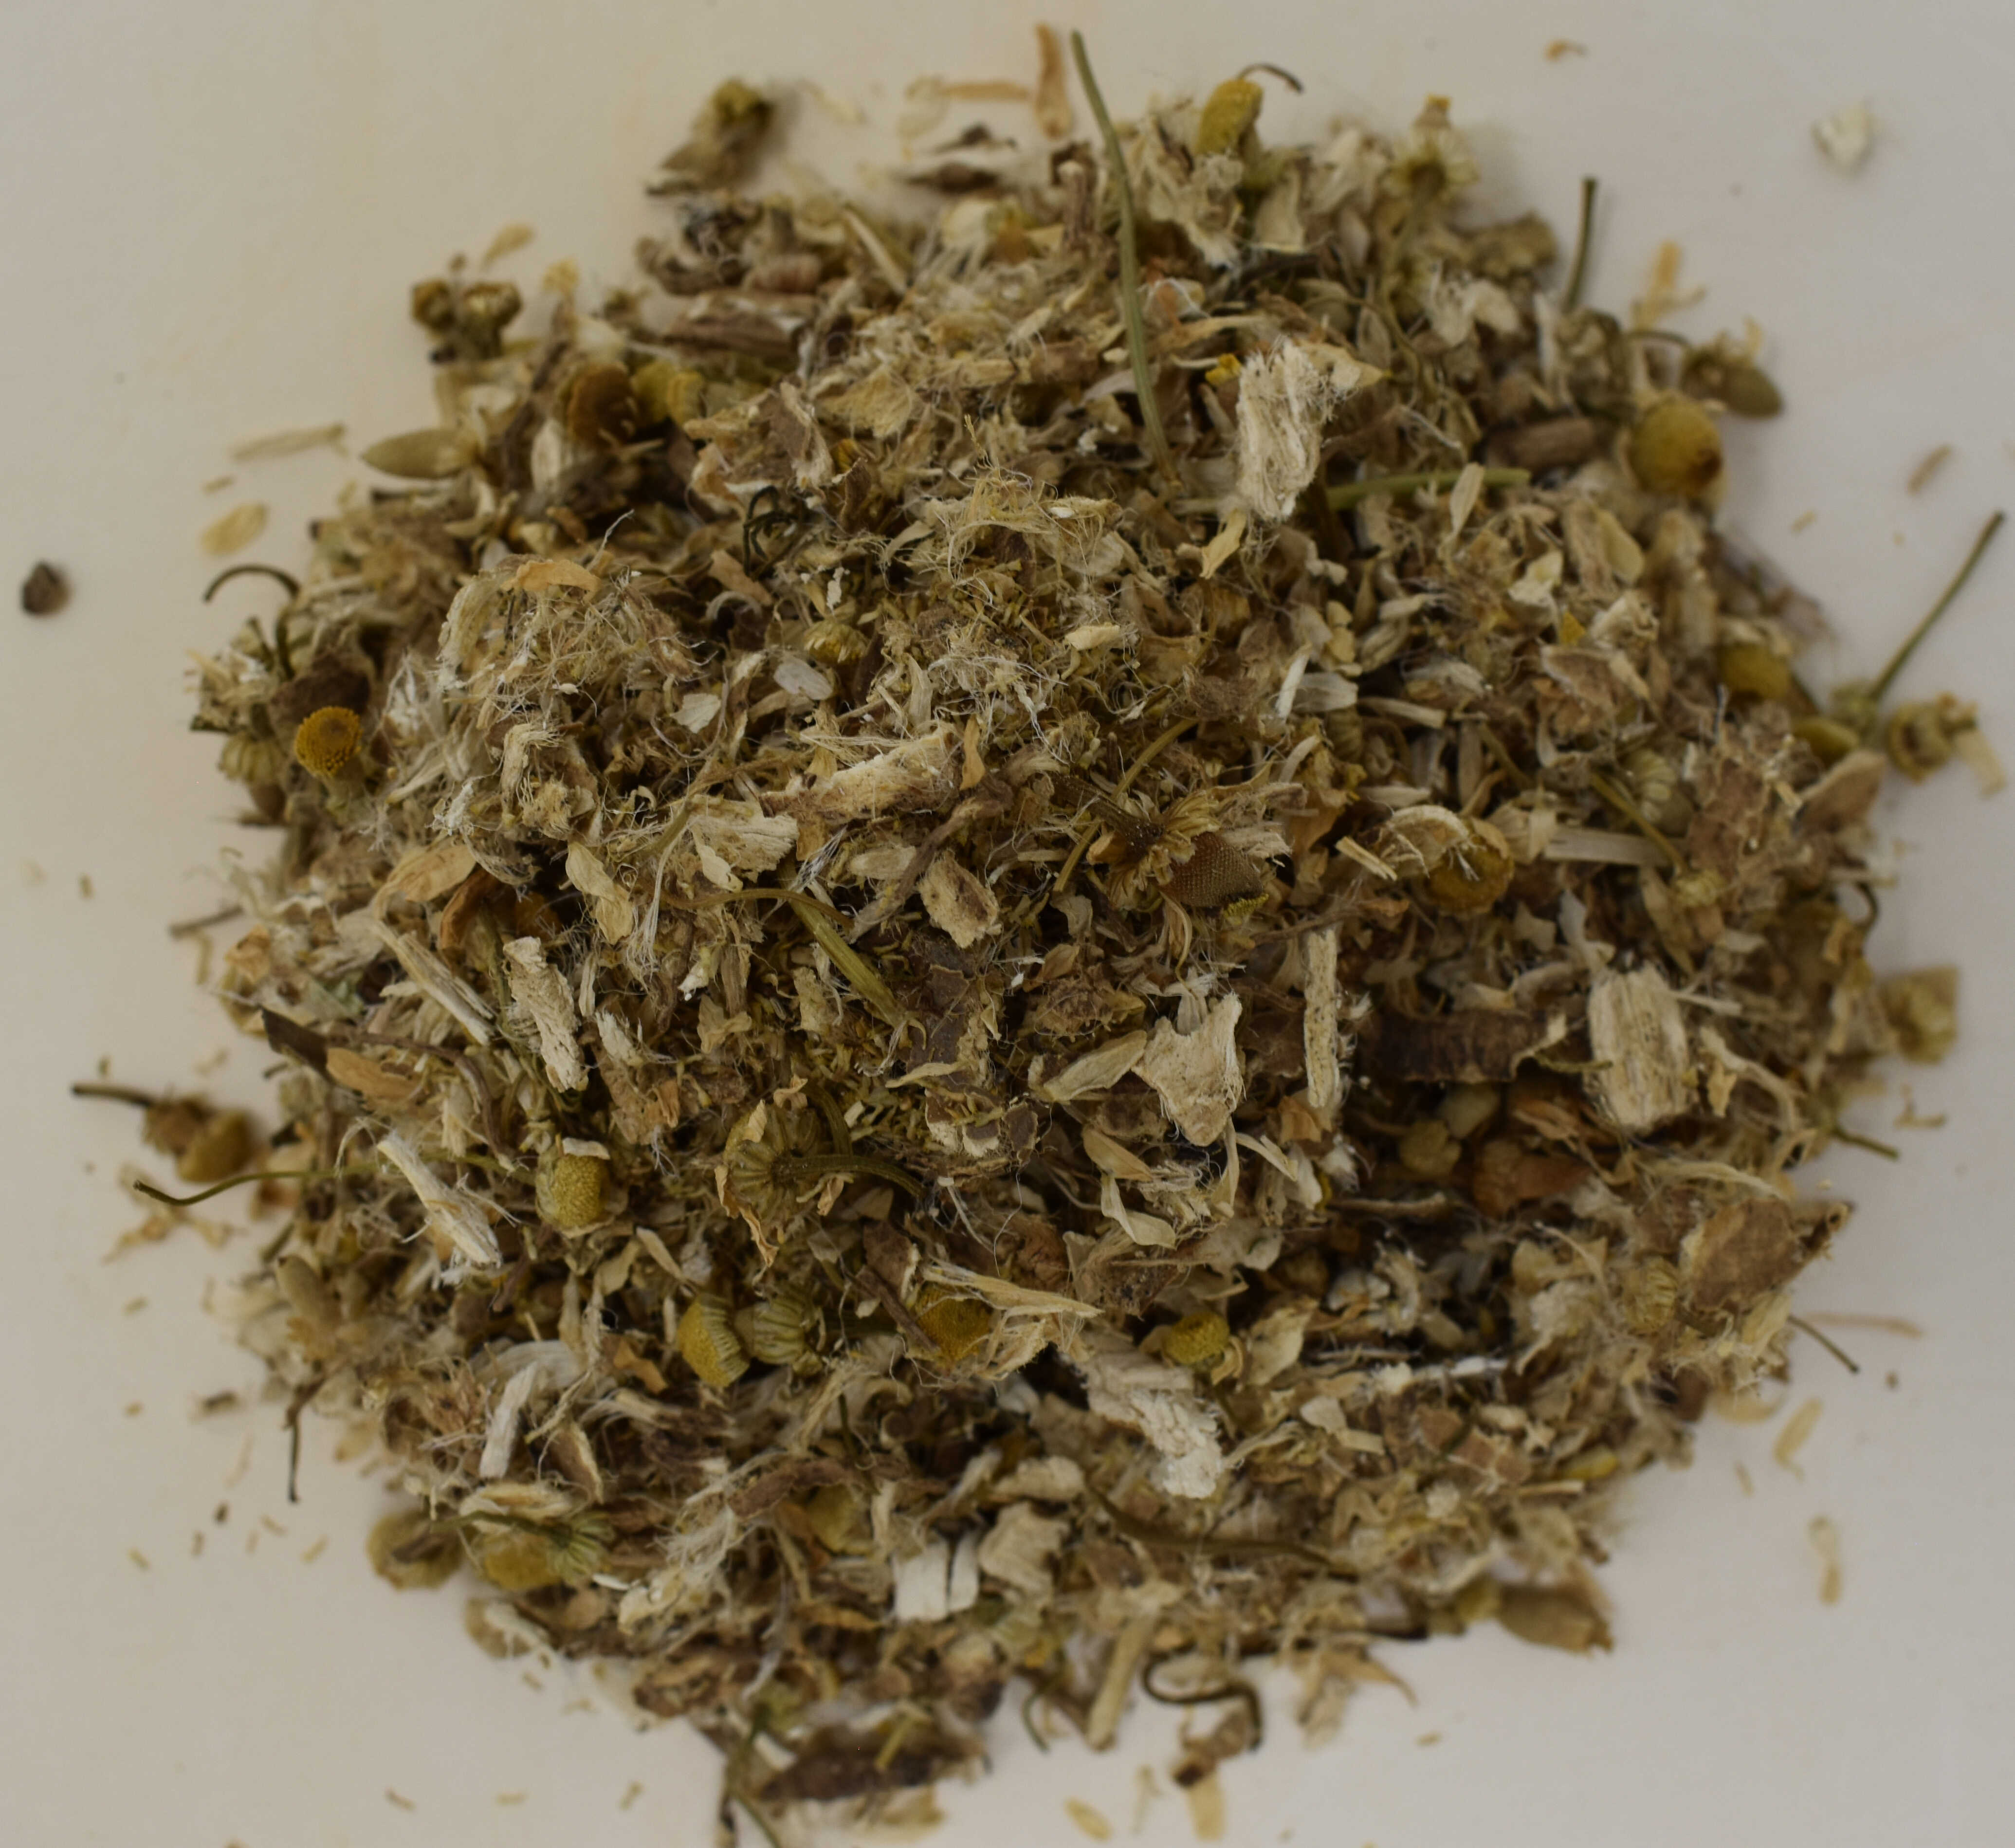 Marshmallow Root and Chamomile Flower Formula - Top Photo